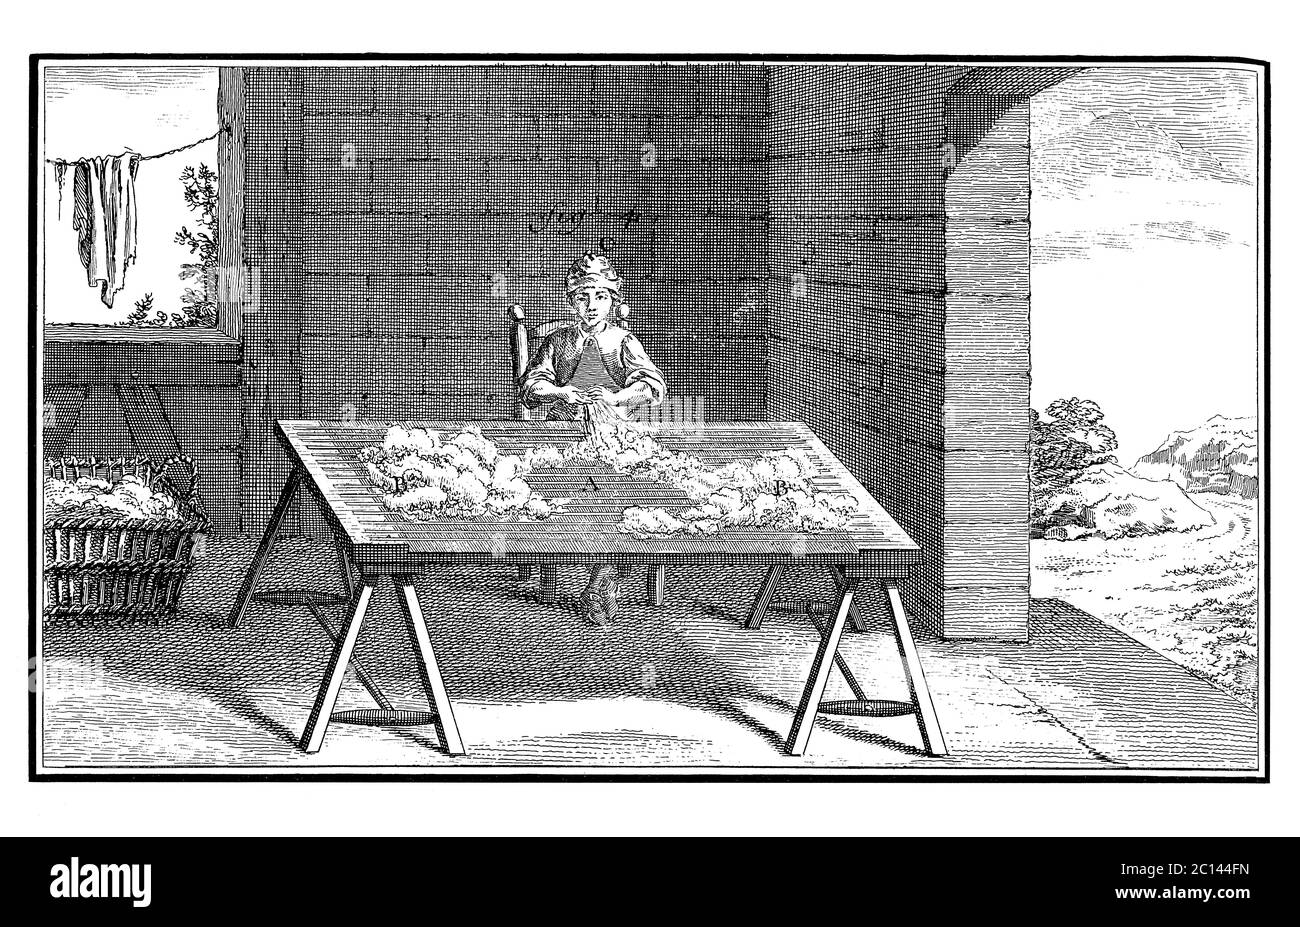 Antique illustration of how workman sorting woolen fibres according to the length and quality. Published in 'A Diderot Pictorial Encyclopedia of Trade Stock Photo